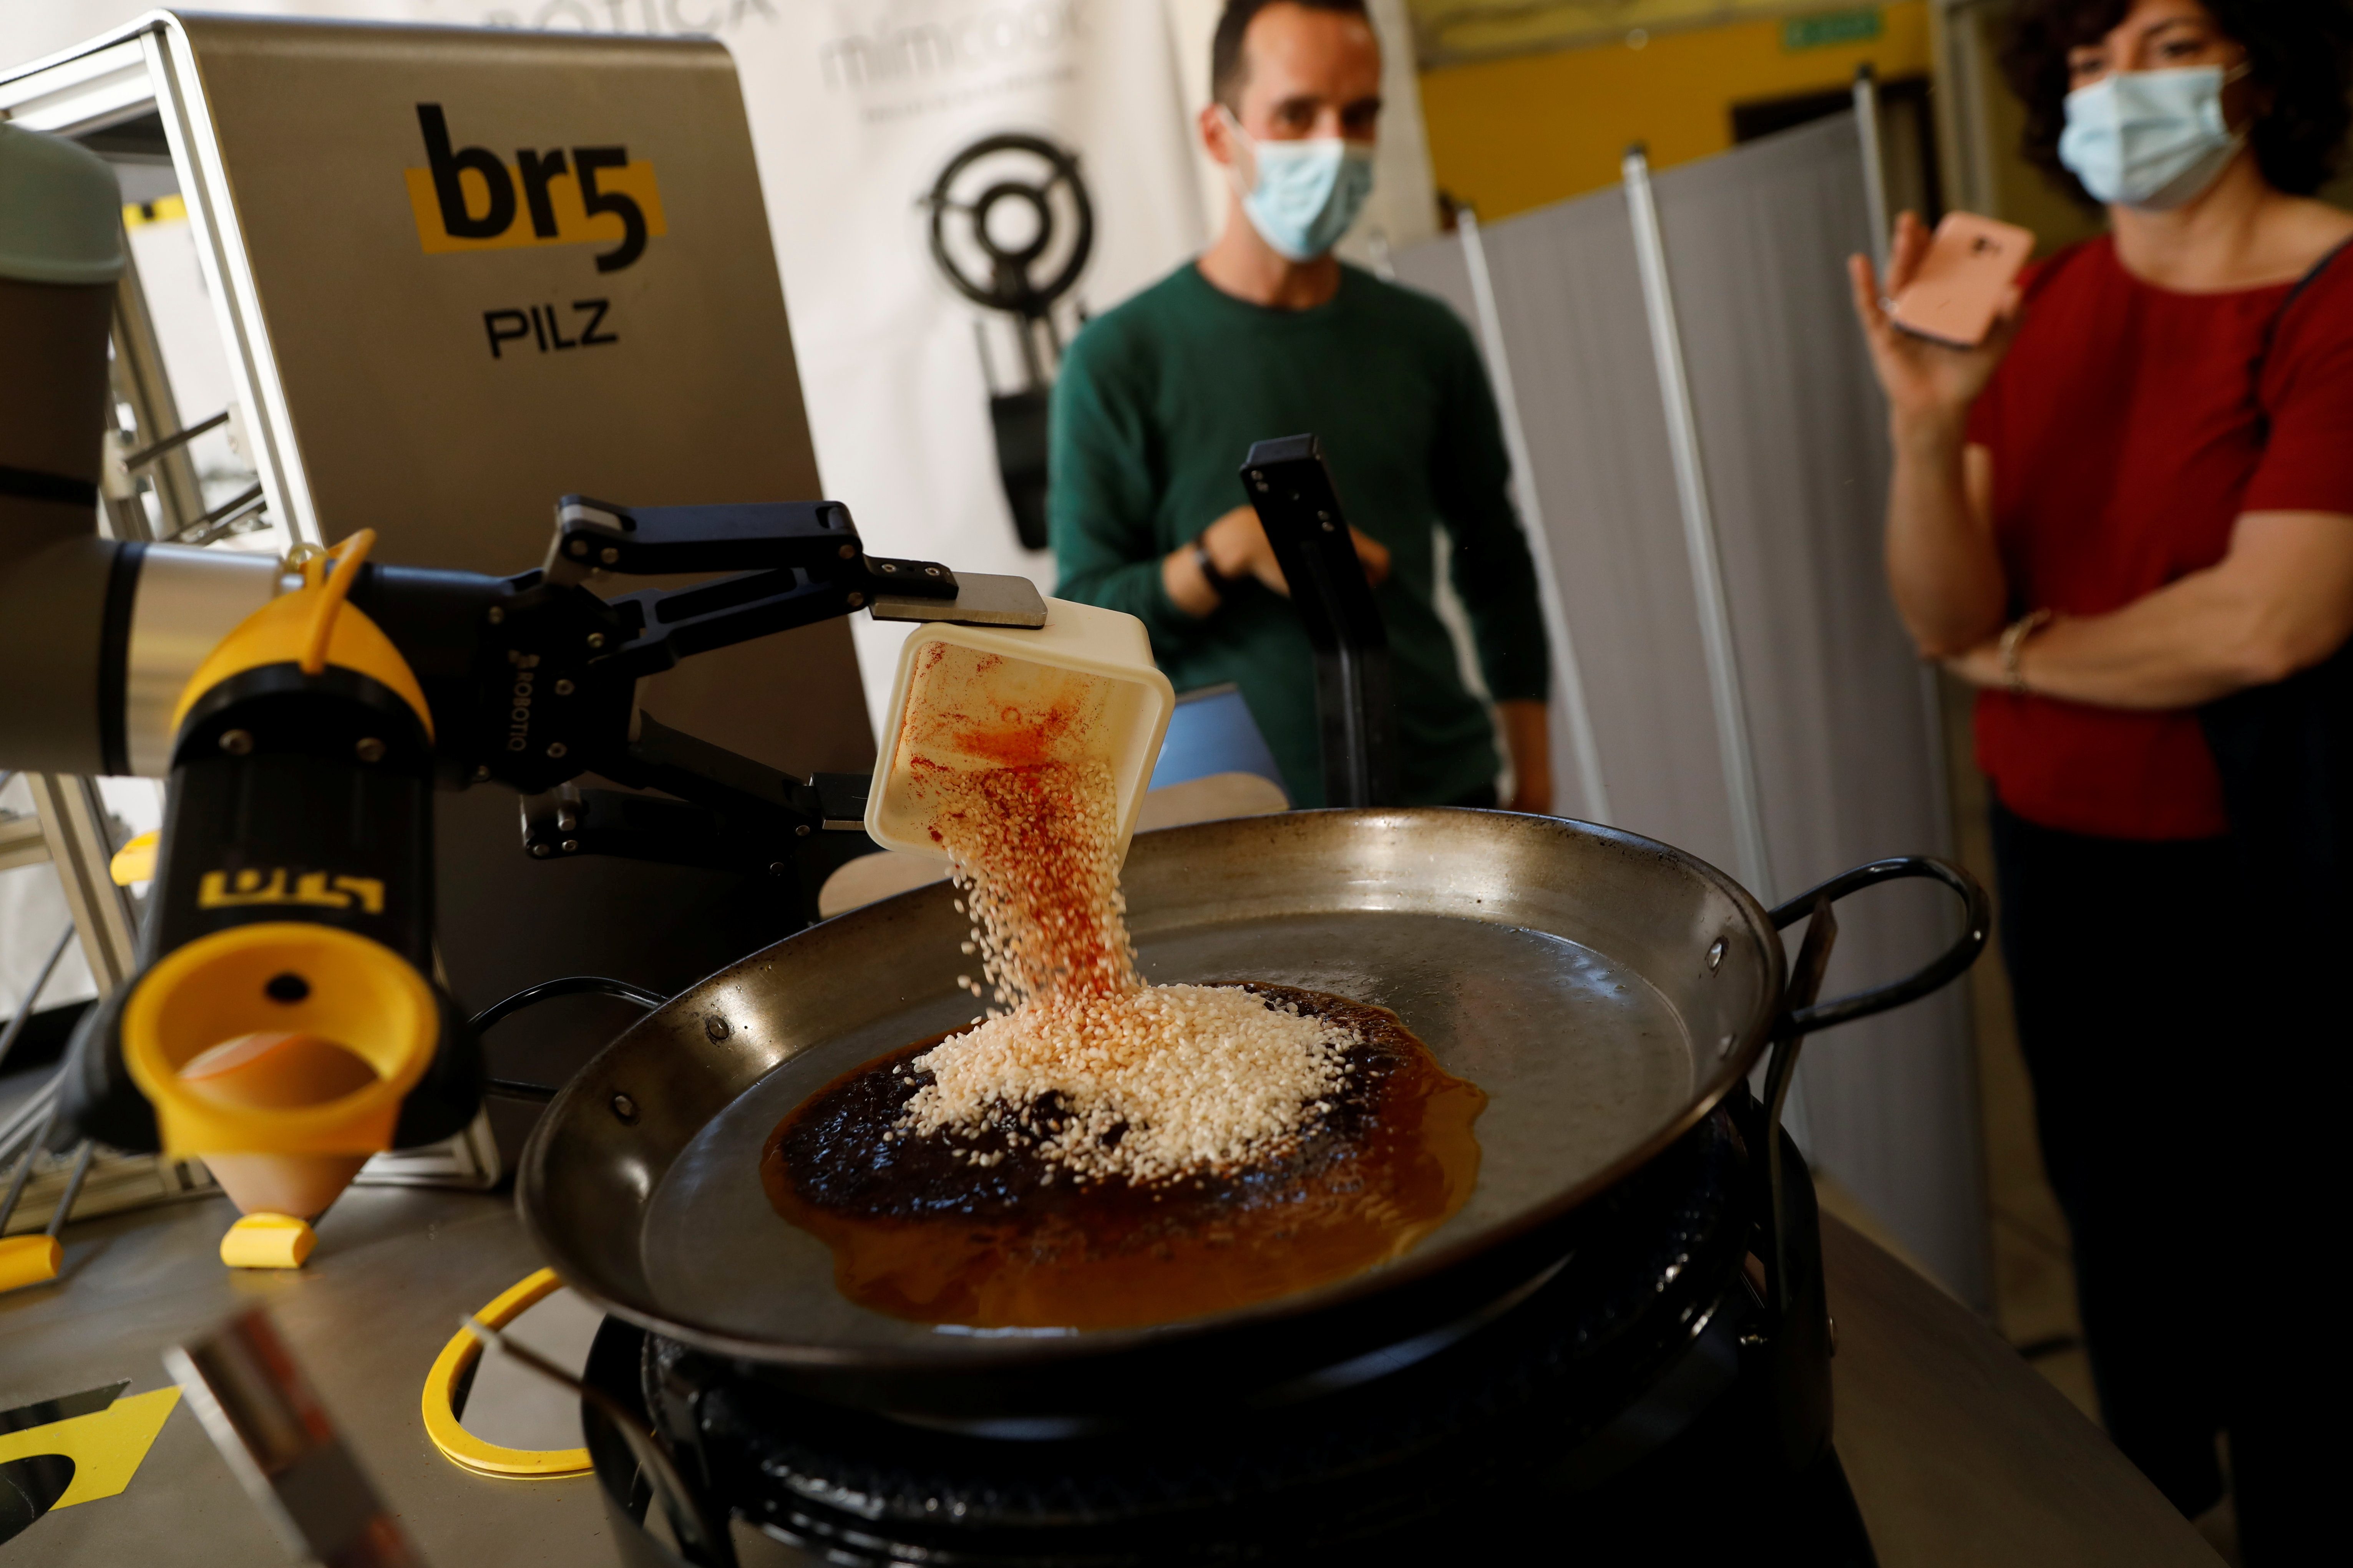 Robot-made paella given thumbs up by Spanish chef